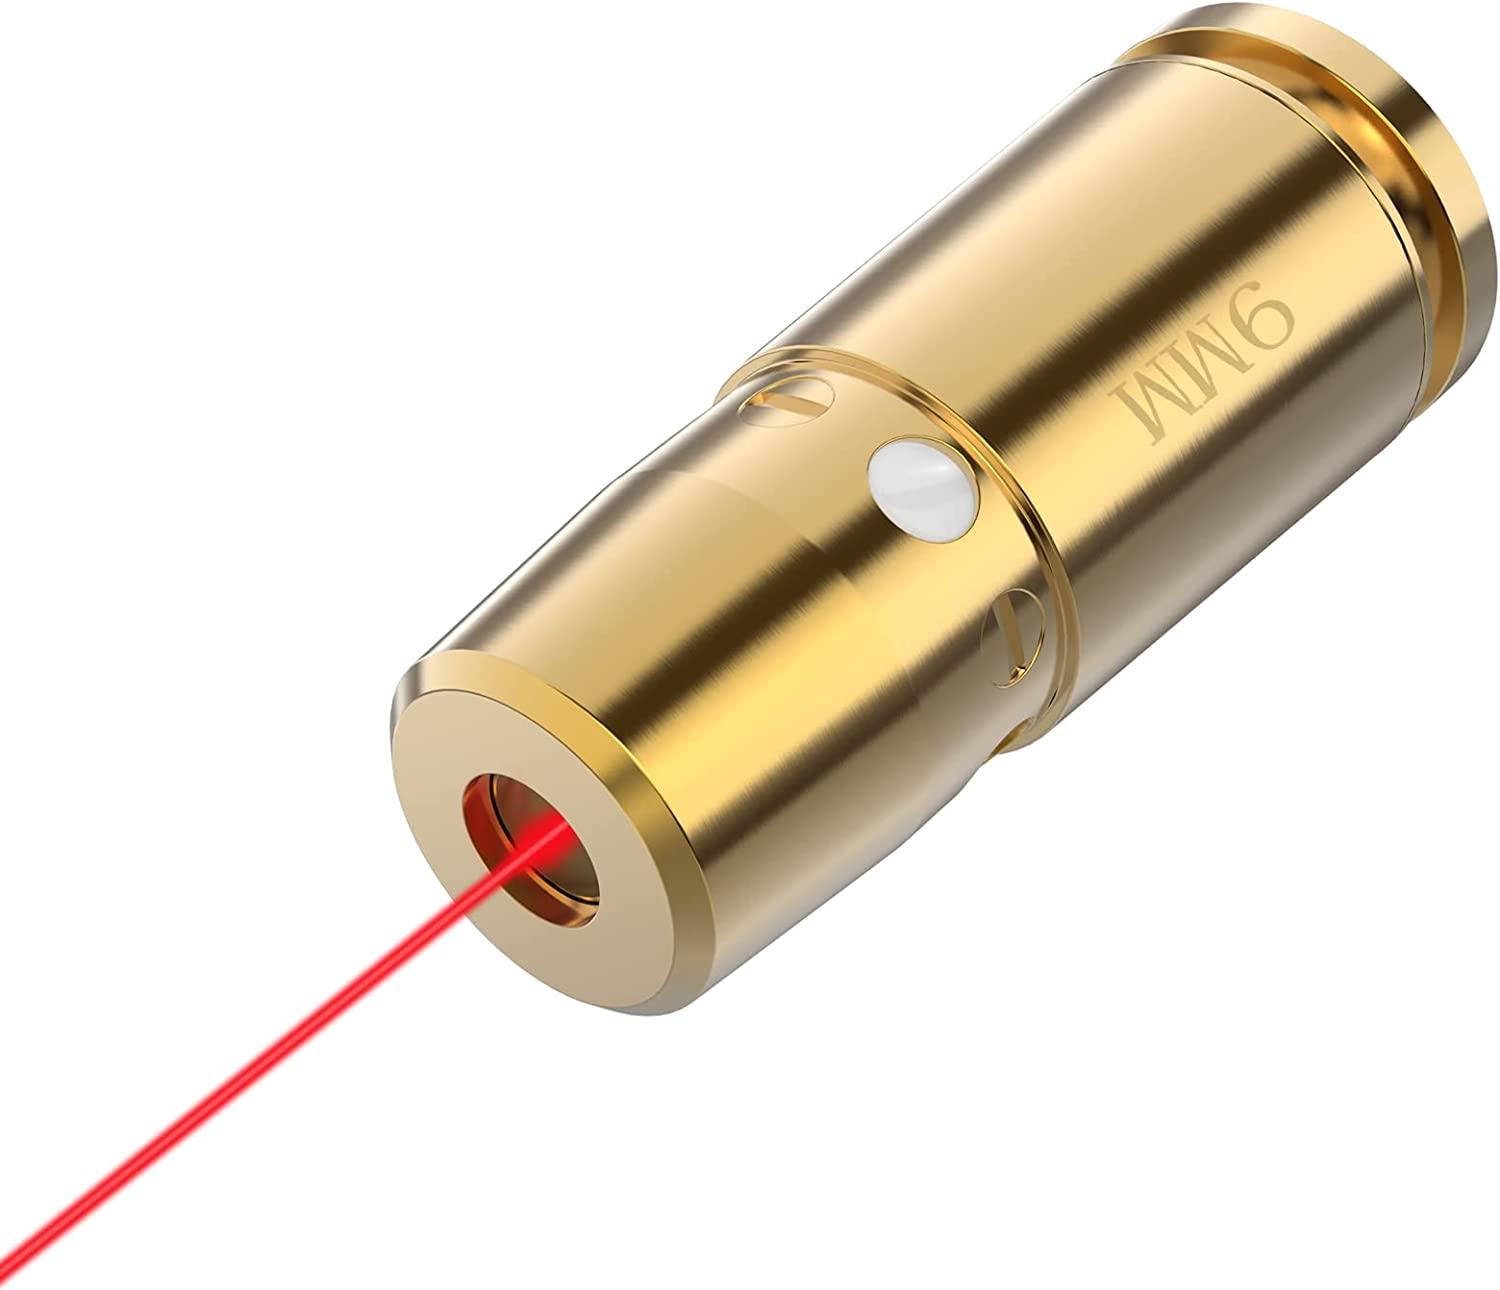 EZshoot Bore Sight 9mm Laser Boresighter with 3 Sets of Batteries